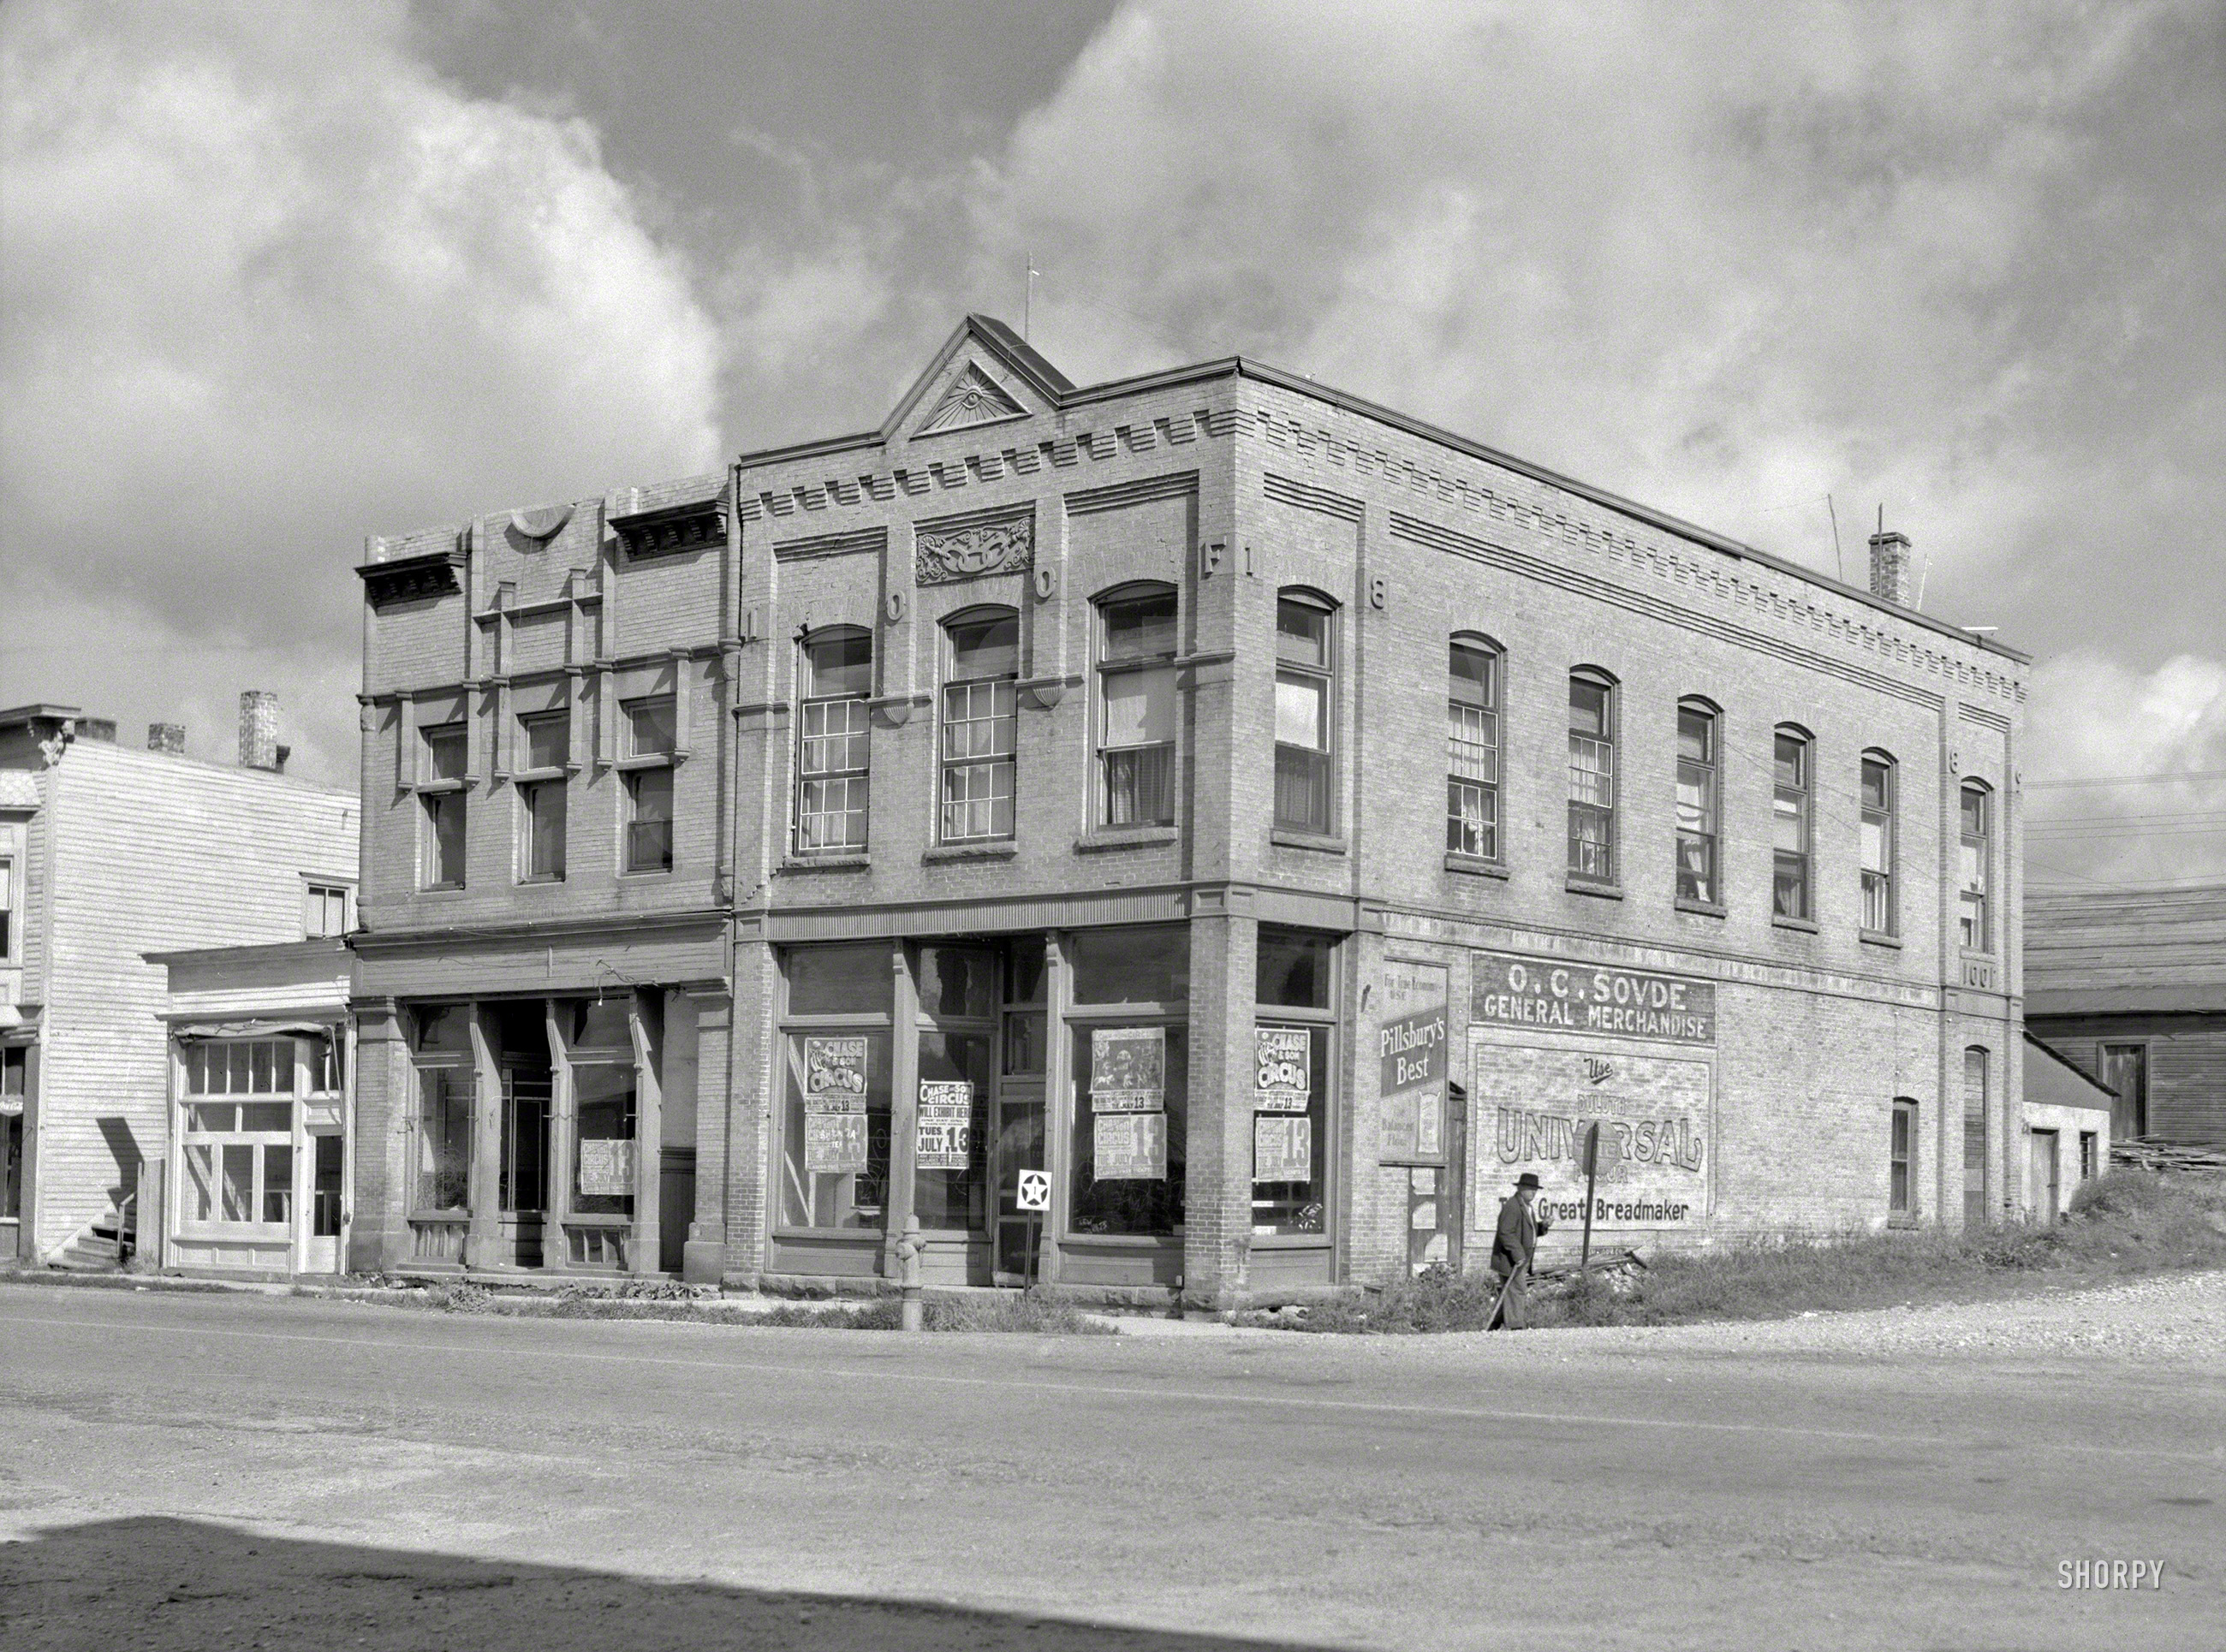 August 1937. "Vacant building. Biwabik, Minnesota." Medium format negative by Russell Lee for the Resettlement Administration. View full size.